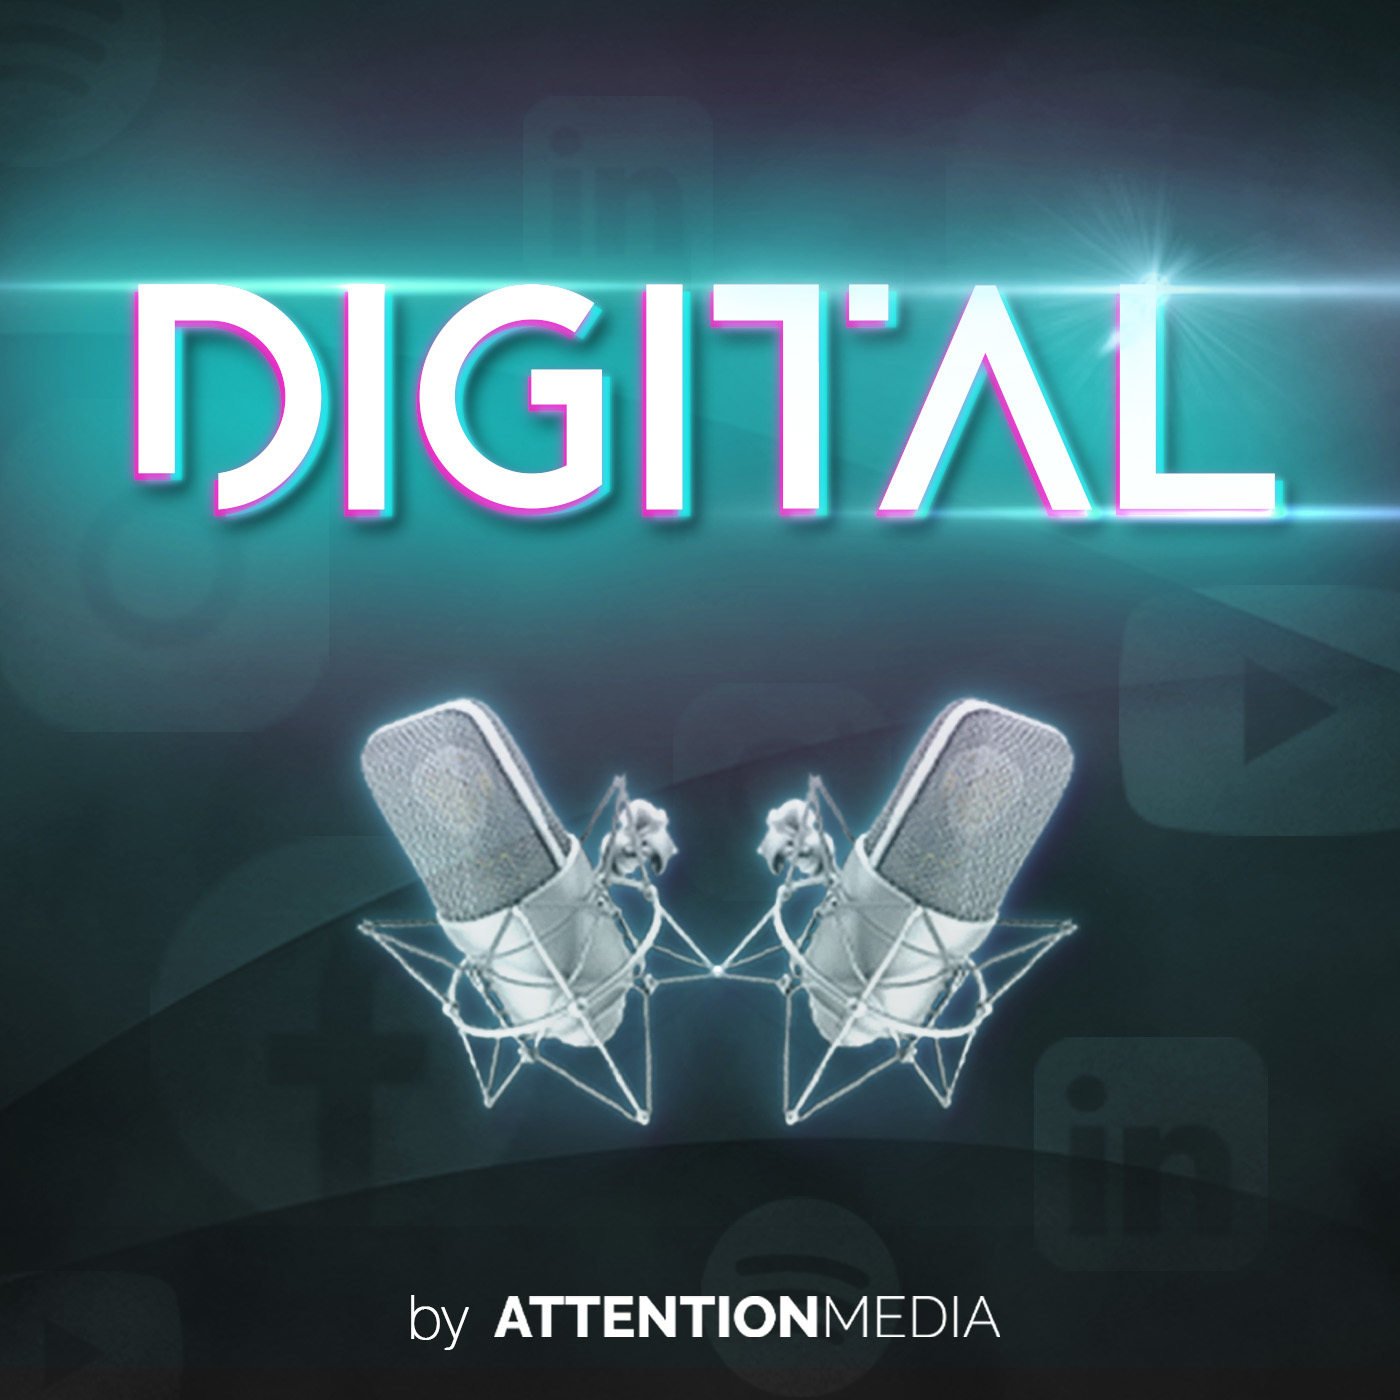 Digital by AttentionMedia